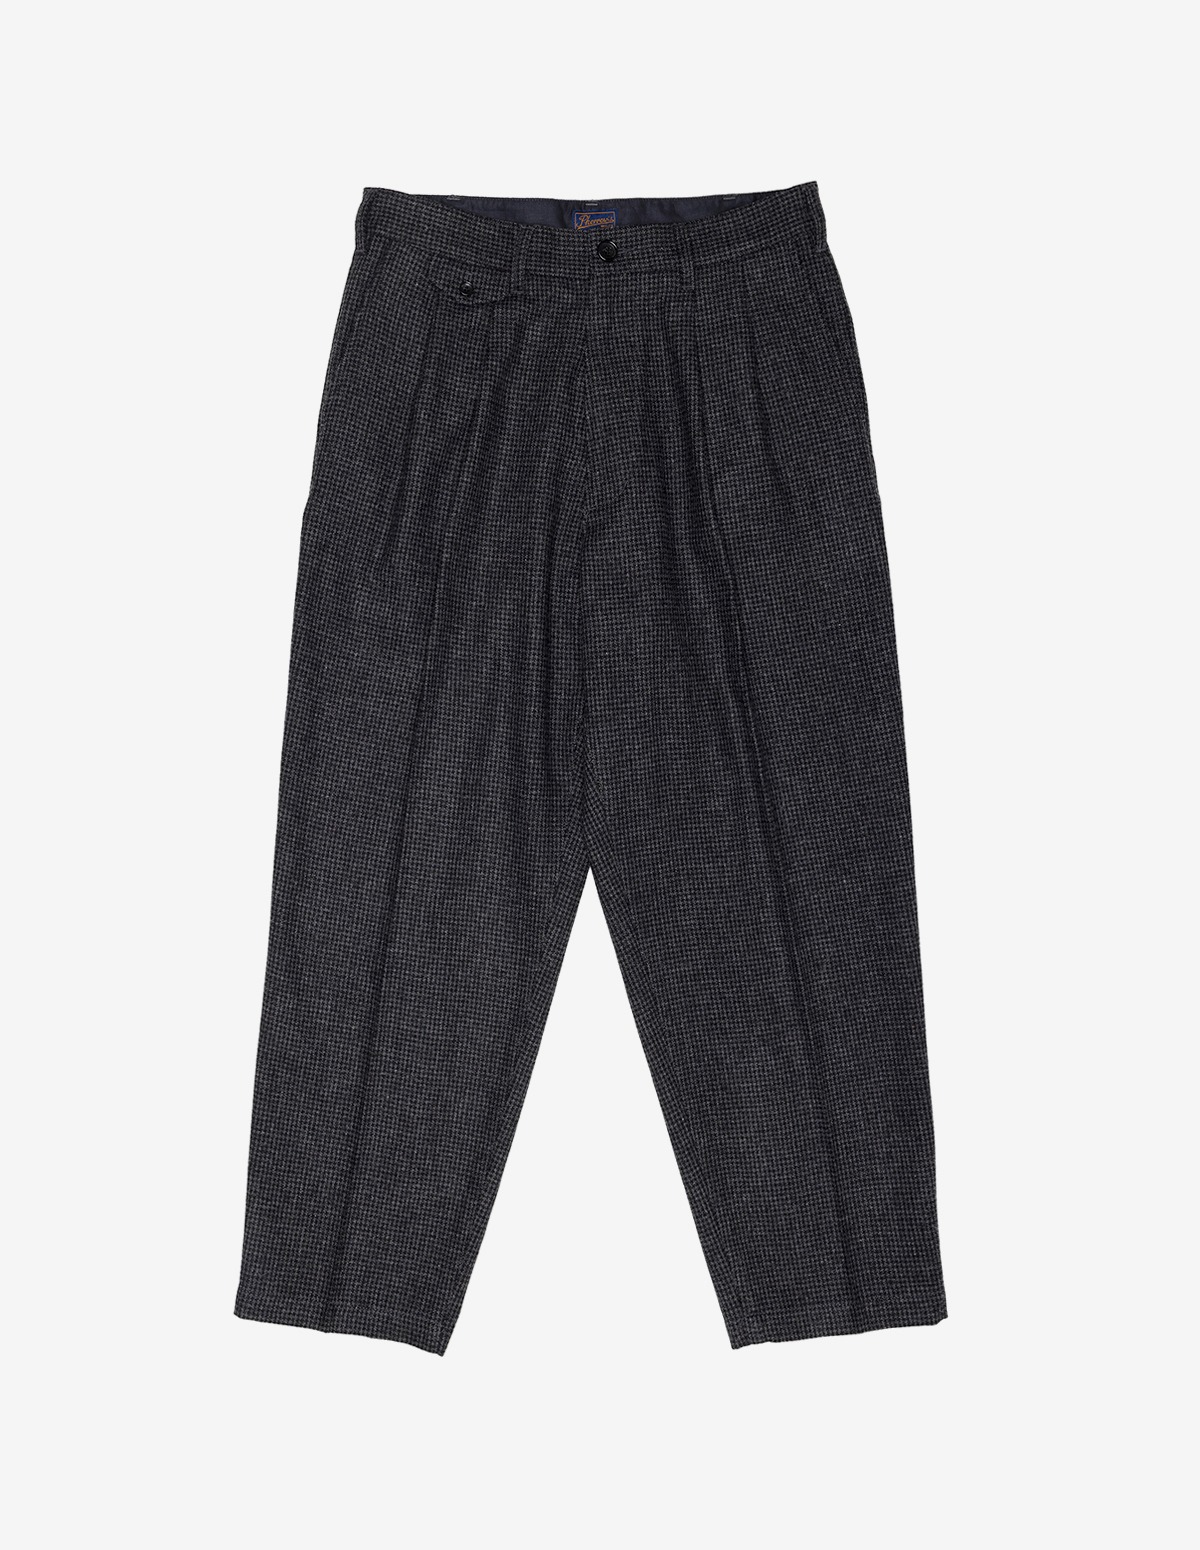 22W-PTTP1 Two-tuck Tapered Pants